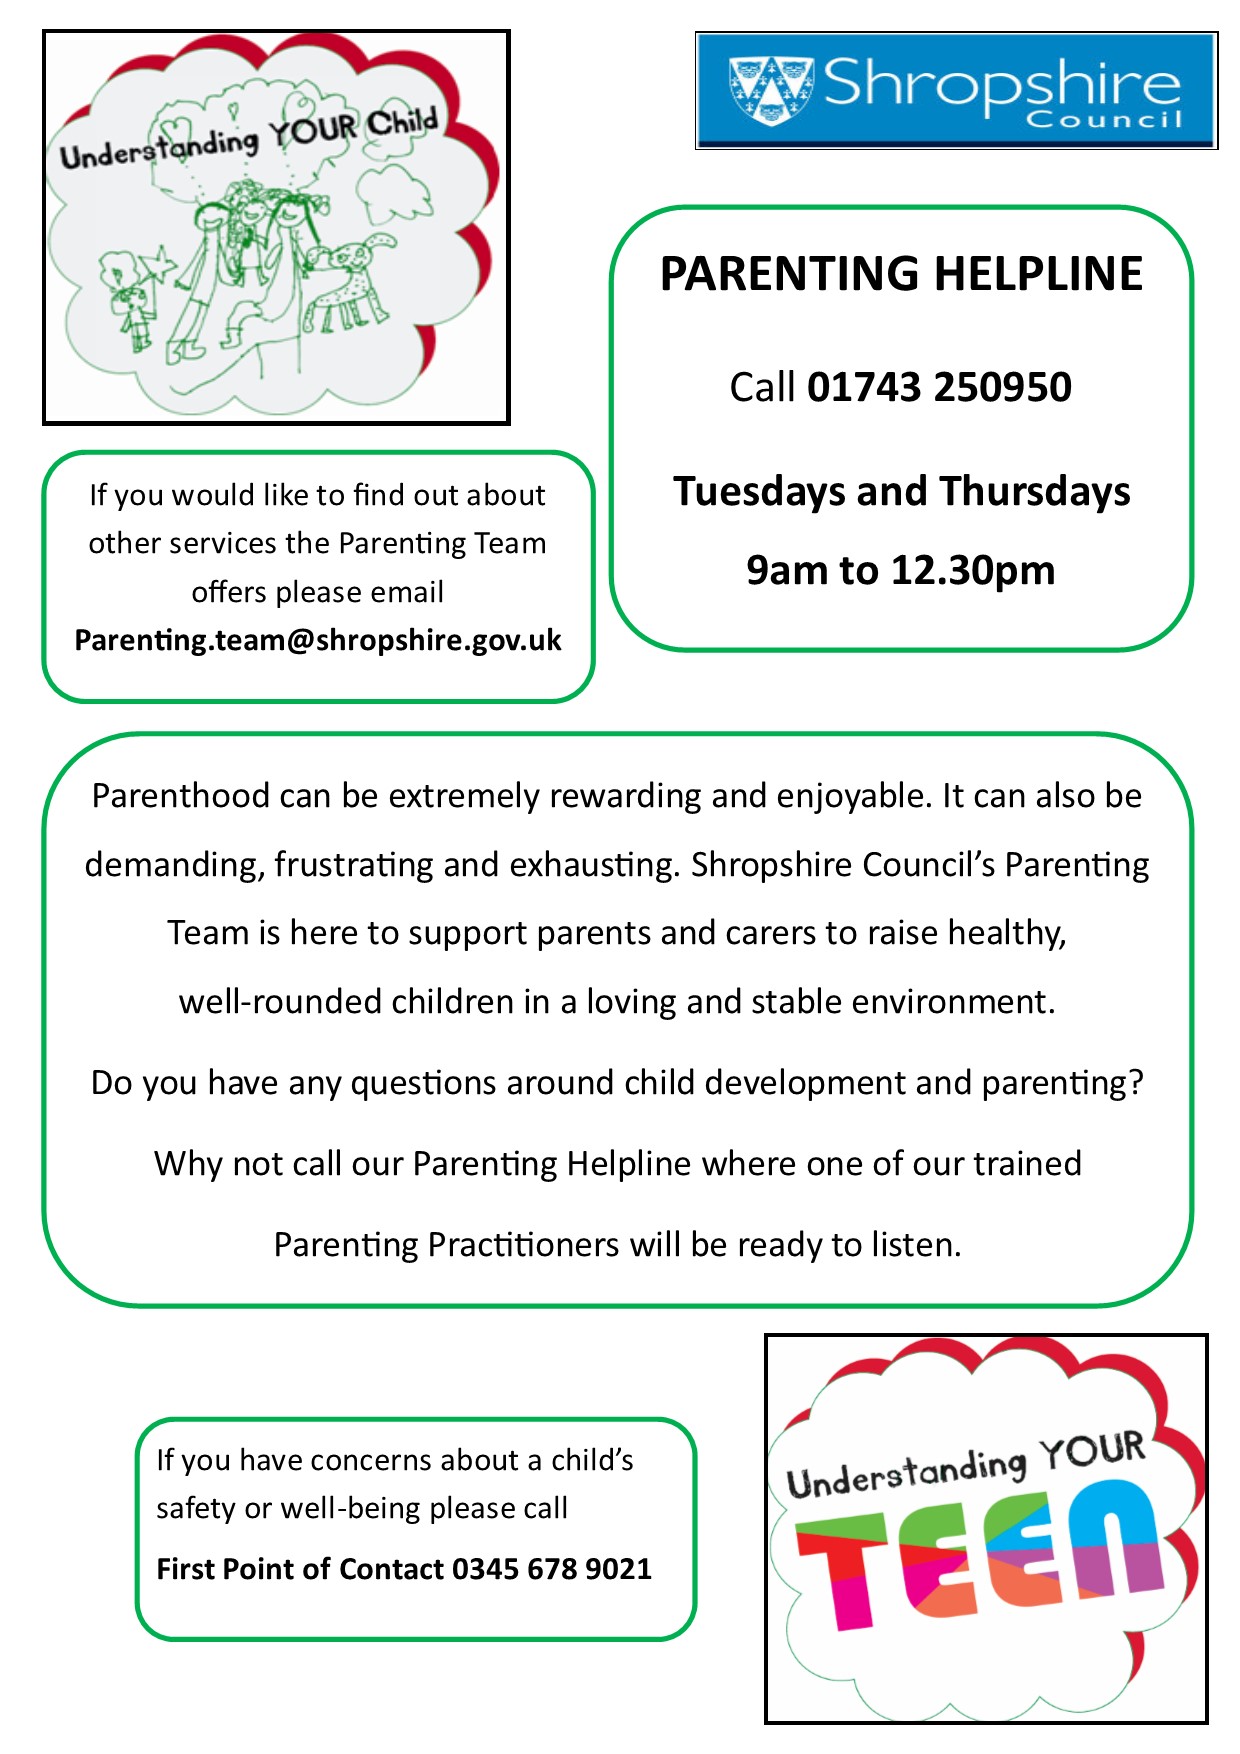 Parents/Carers can call the Helpline number and will be transferred to a Parenting Practitioner.  Please note that it is NOT an emergency helpline to discuss safety concerns but they can call First Point of Contact on 0345 678 9021